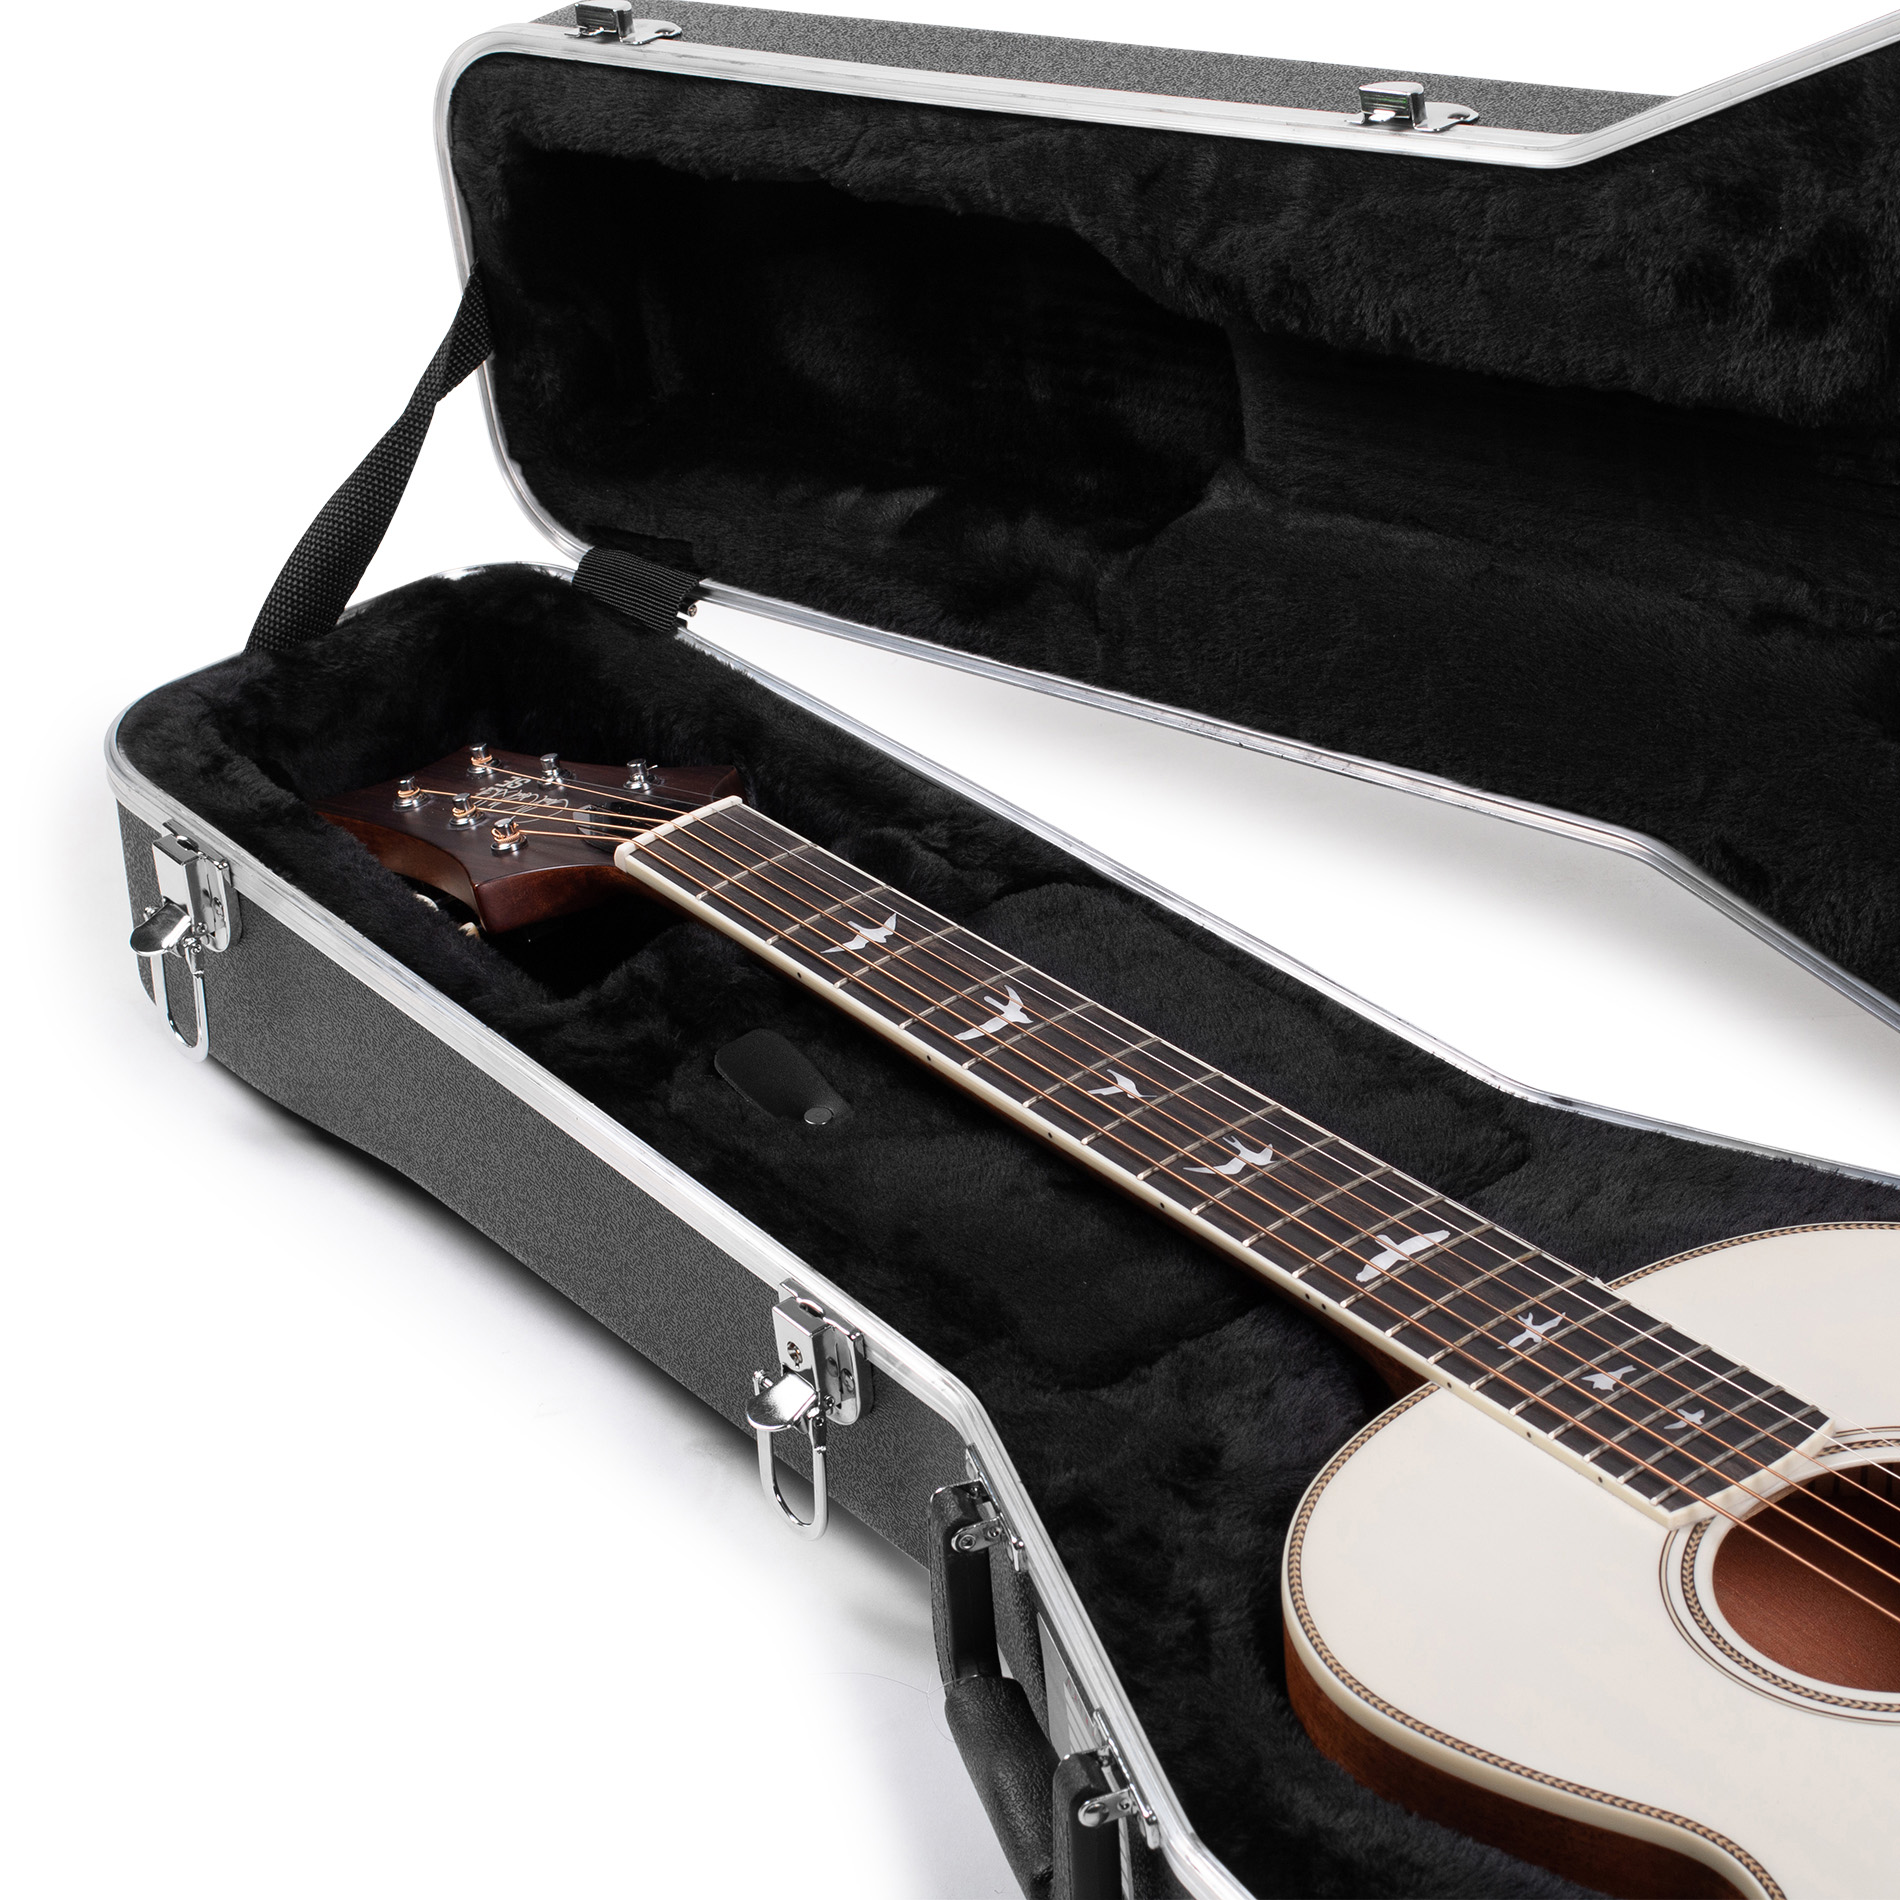 Deluxe Molded Case for Parlor Guitars-GC-PARLOR